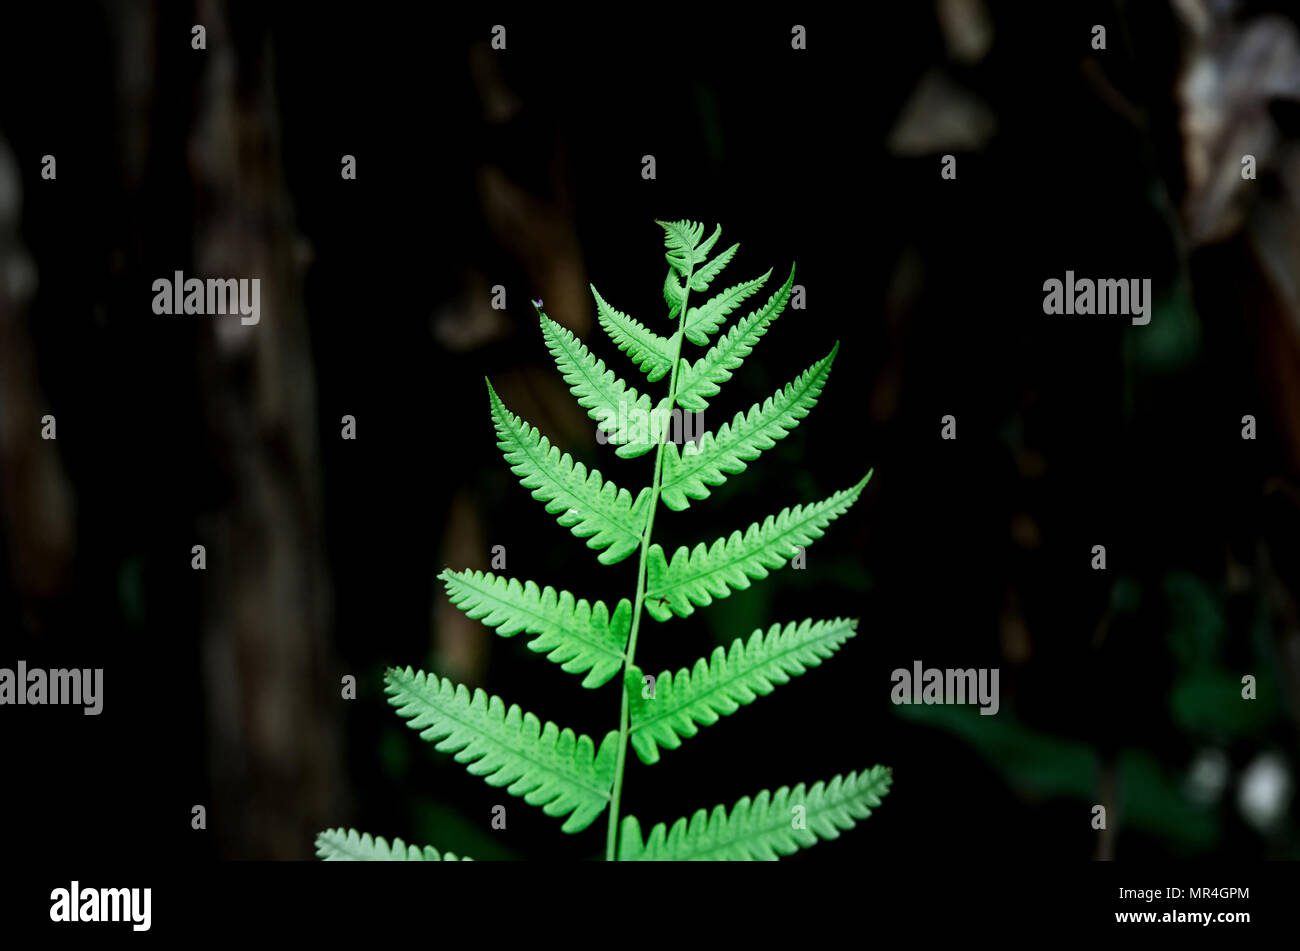 Green fern leaves and and close up of fern leaves, Background by fern leaf, Fern leaves on dark background. Stock Photo